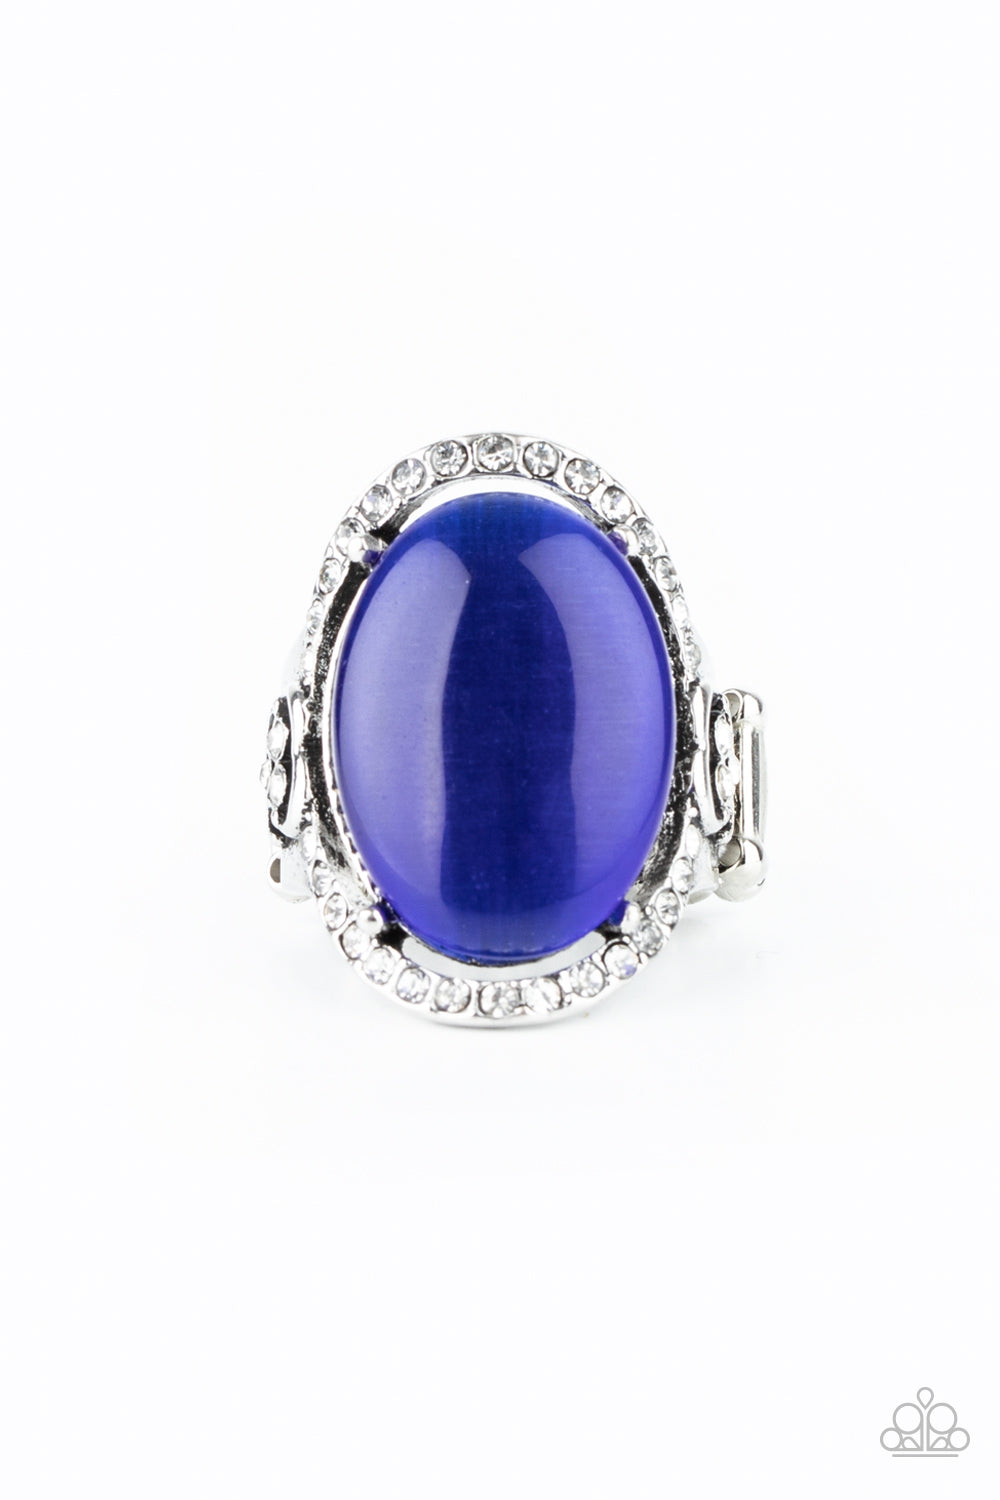 Happily Ever Enchanted - Blue moonstone ring